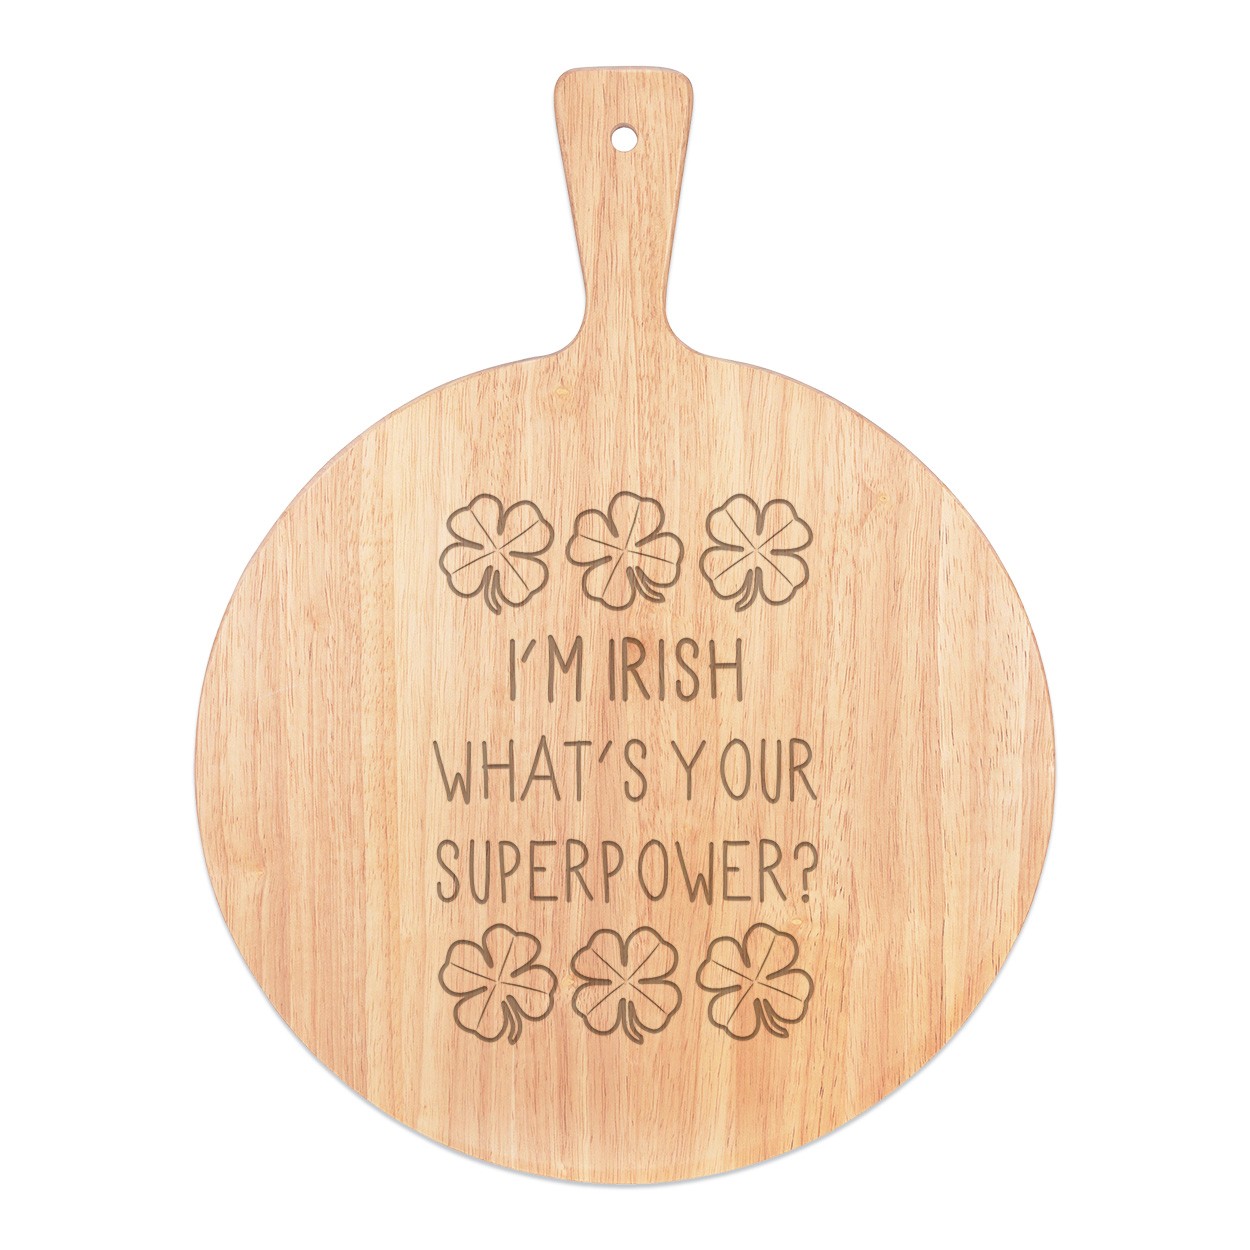 I'm Irish What's Your Superpower Shamrock Pizza Board Paddle Serving Tray Handle Round Wooden 45x34cm